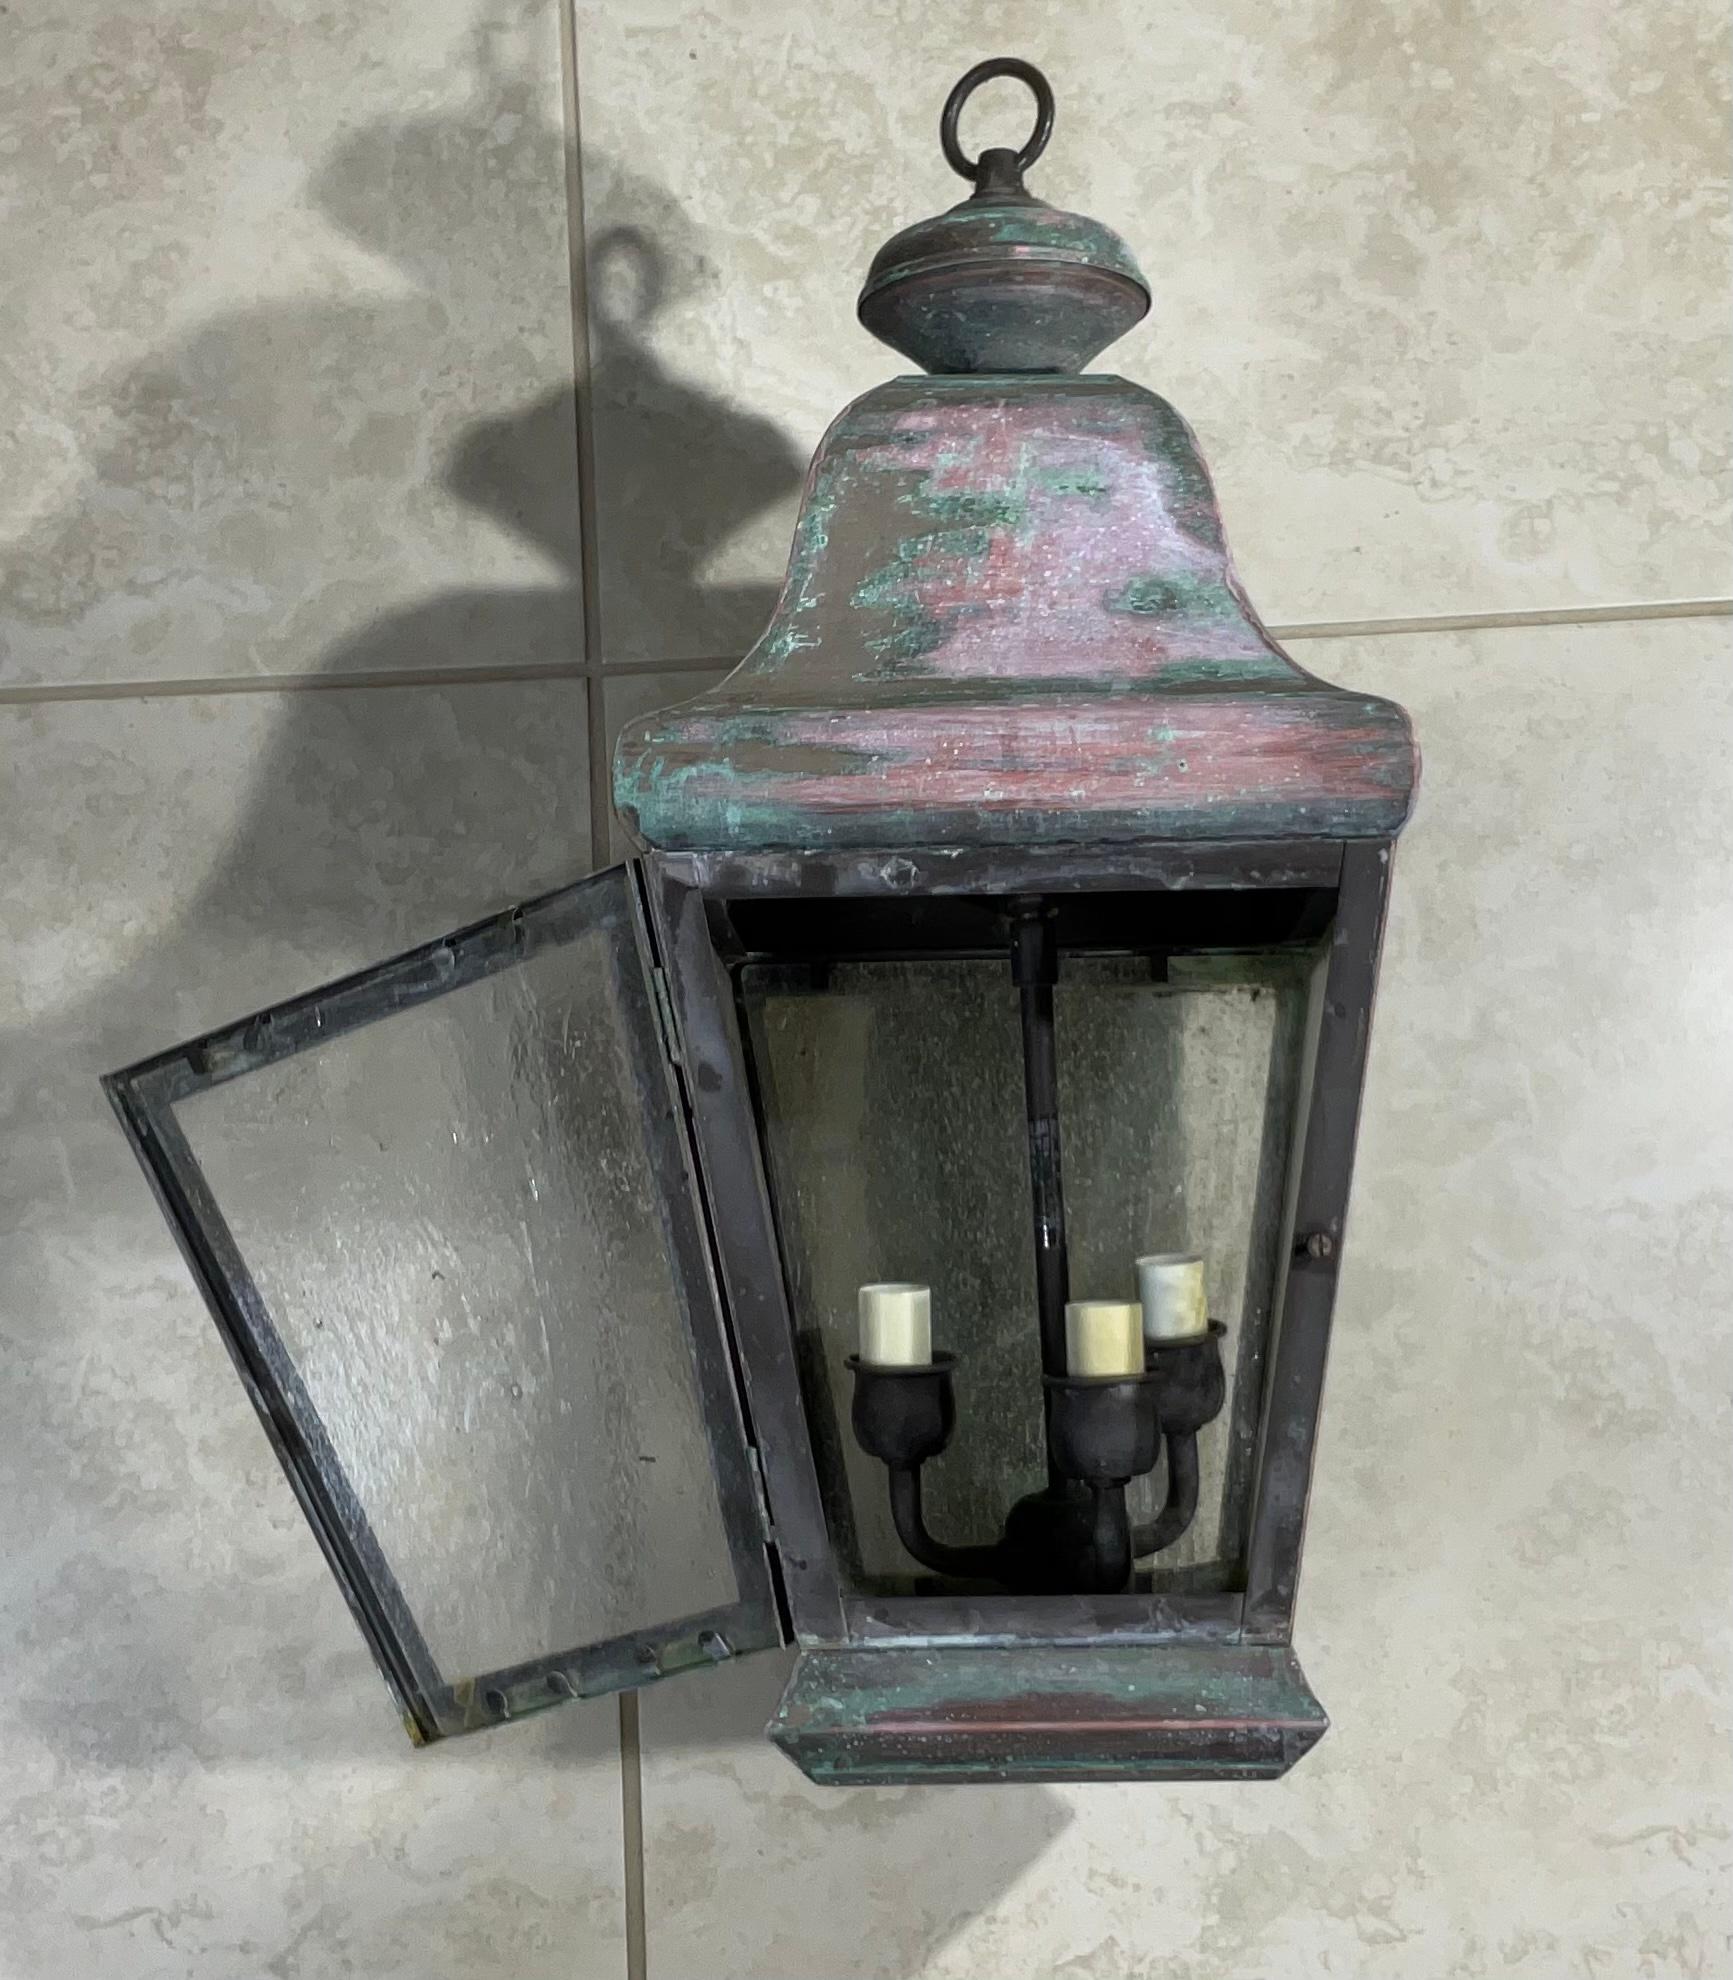 Exceptional single wall hanging lantern made of solid brass, quality workmanship, electrified with three 40 watt lights, beautiful patina great light exposure. Working and ready to use.
Suitable for wet locations.